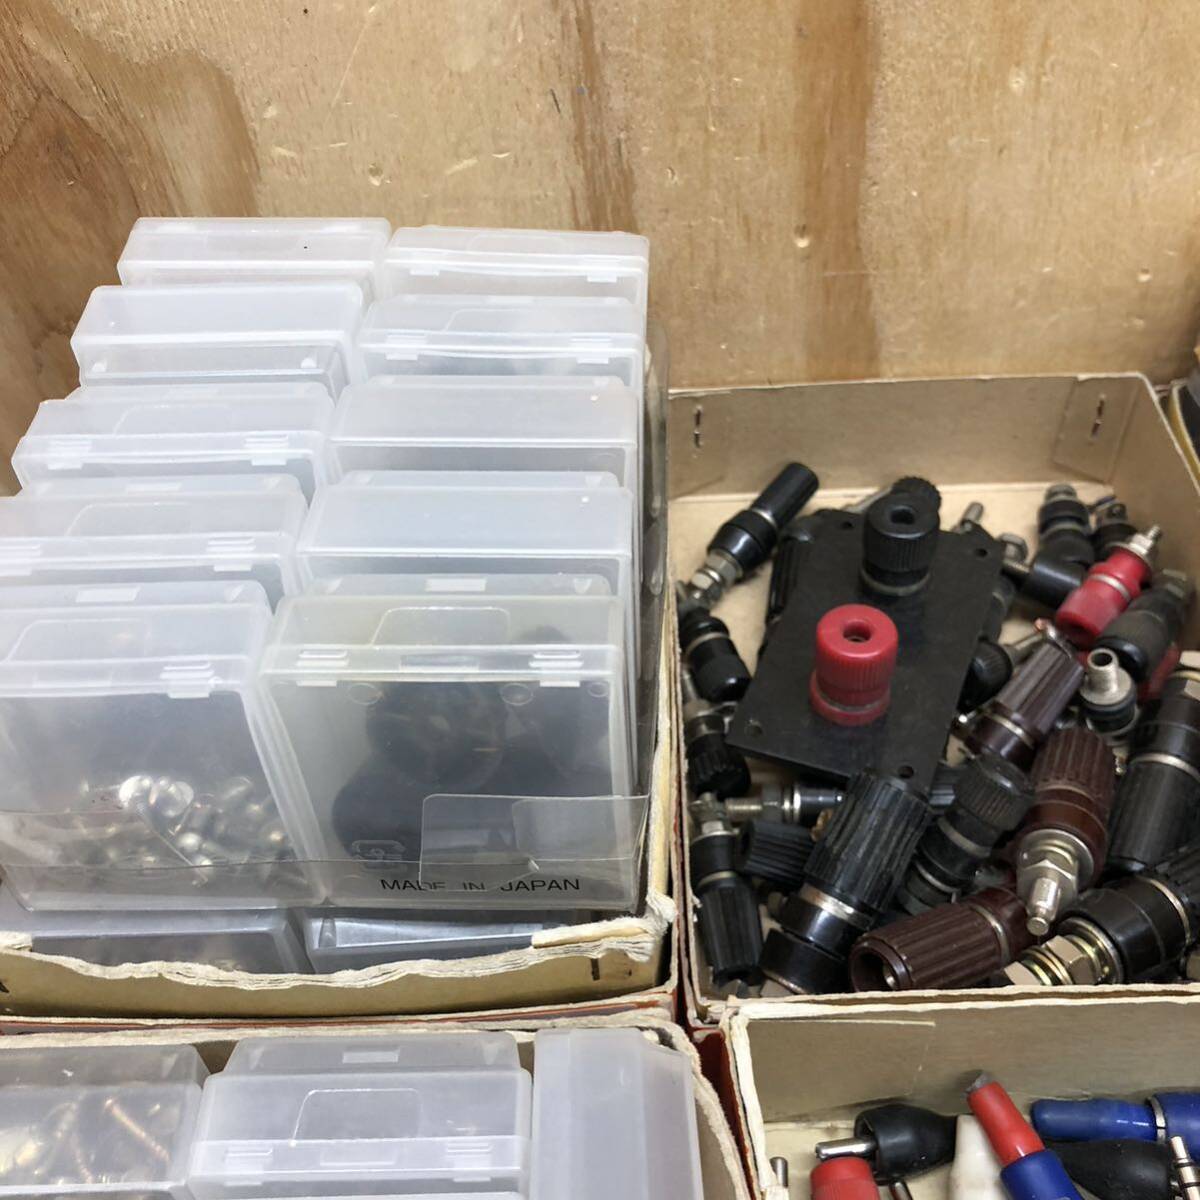  audio parts electron parts etc. various together used Junk copper line for terminal screw fuse audio parts 